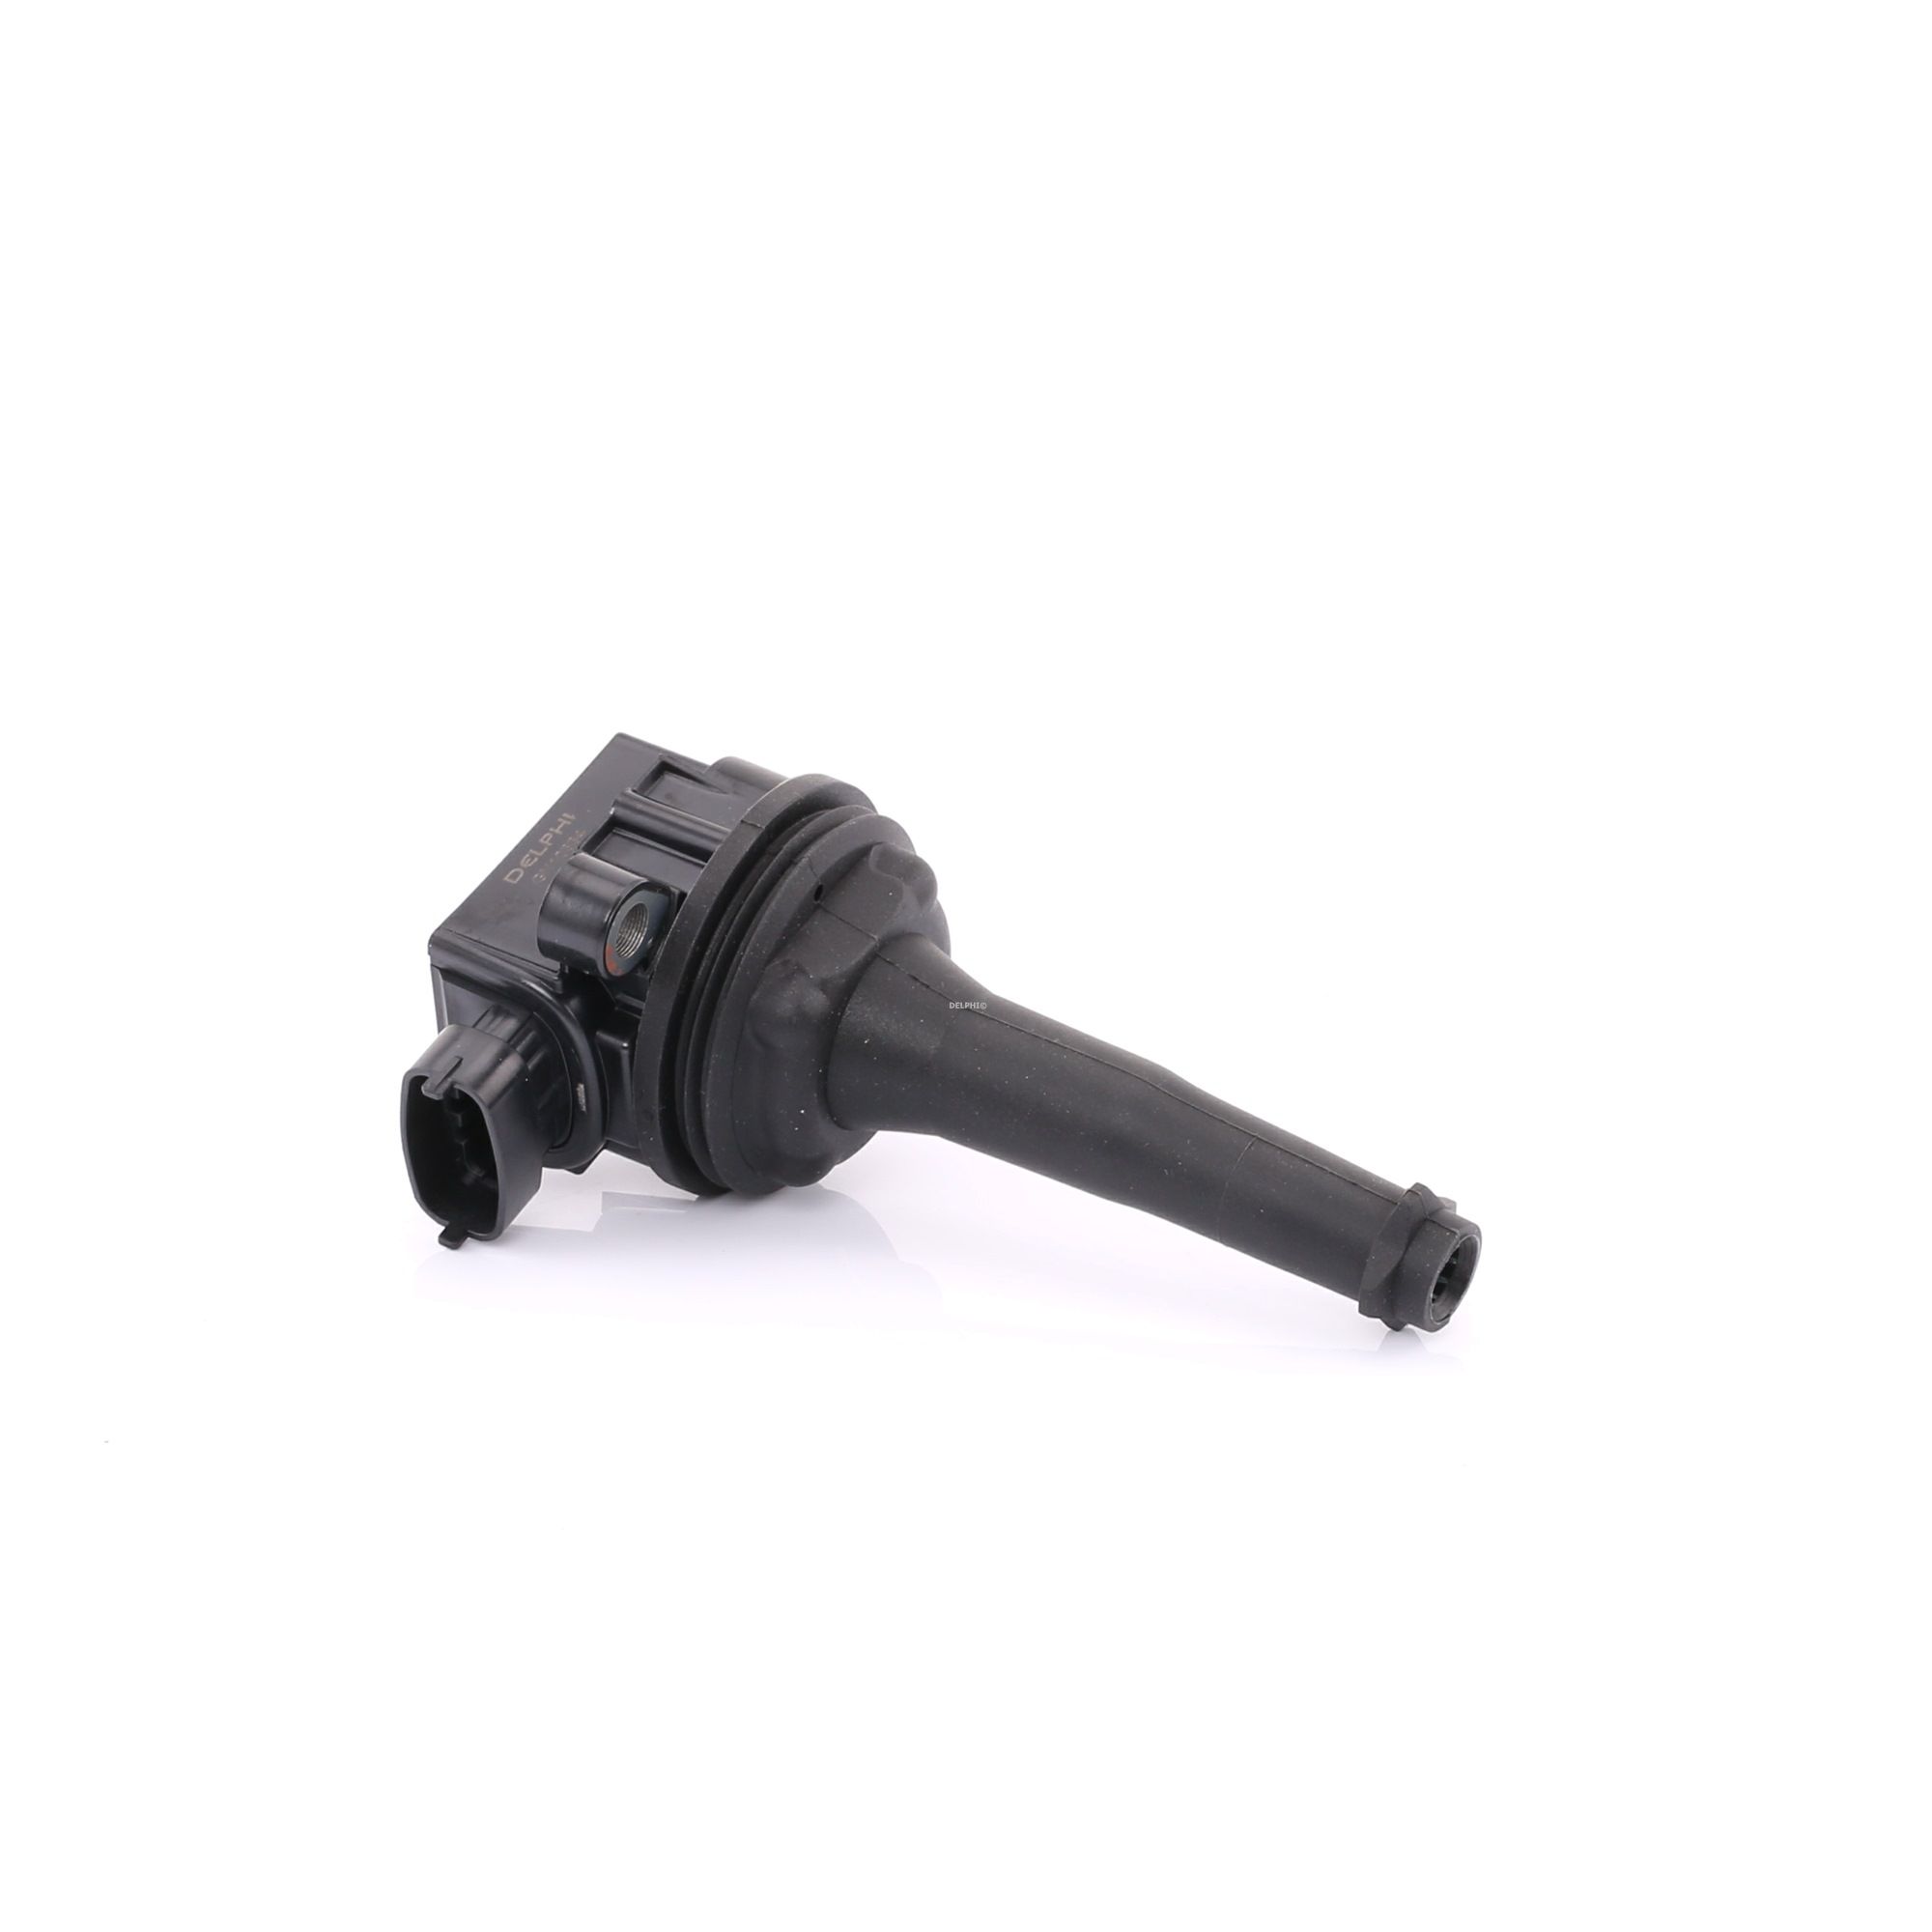 DELPHI GN10334-12B1 Ignition coil 4-pin connector, 12V, Connector Type SAE